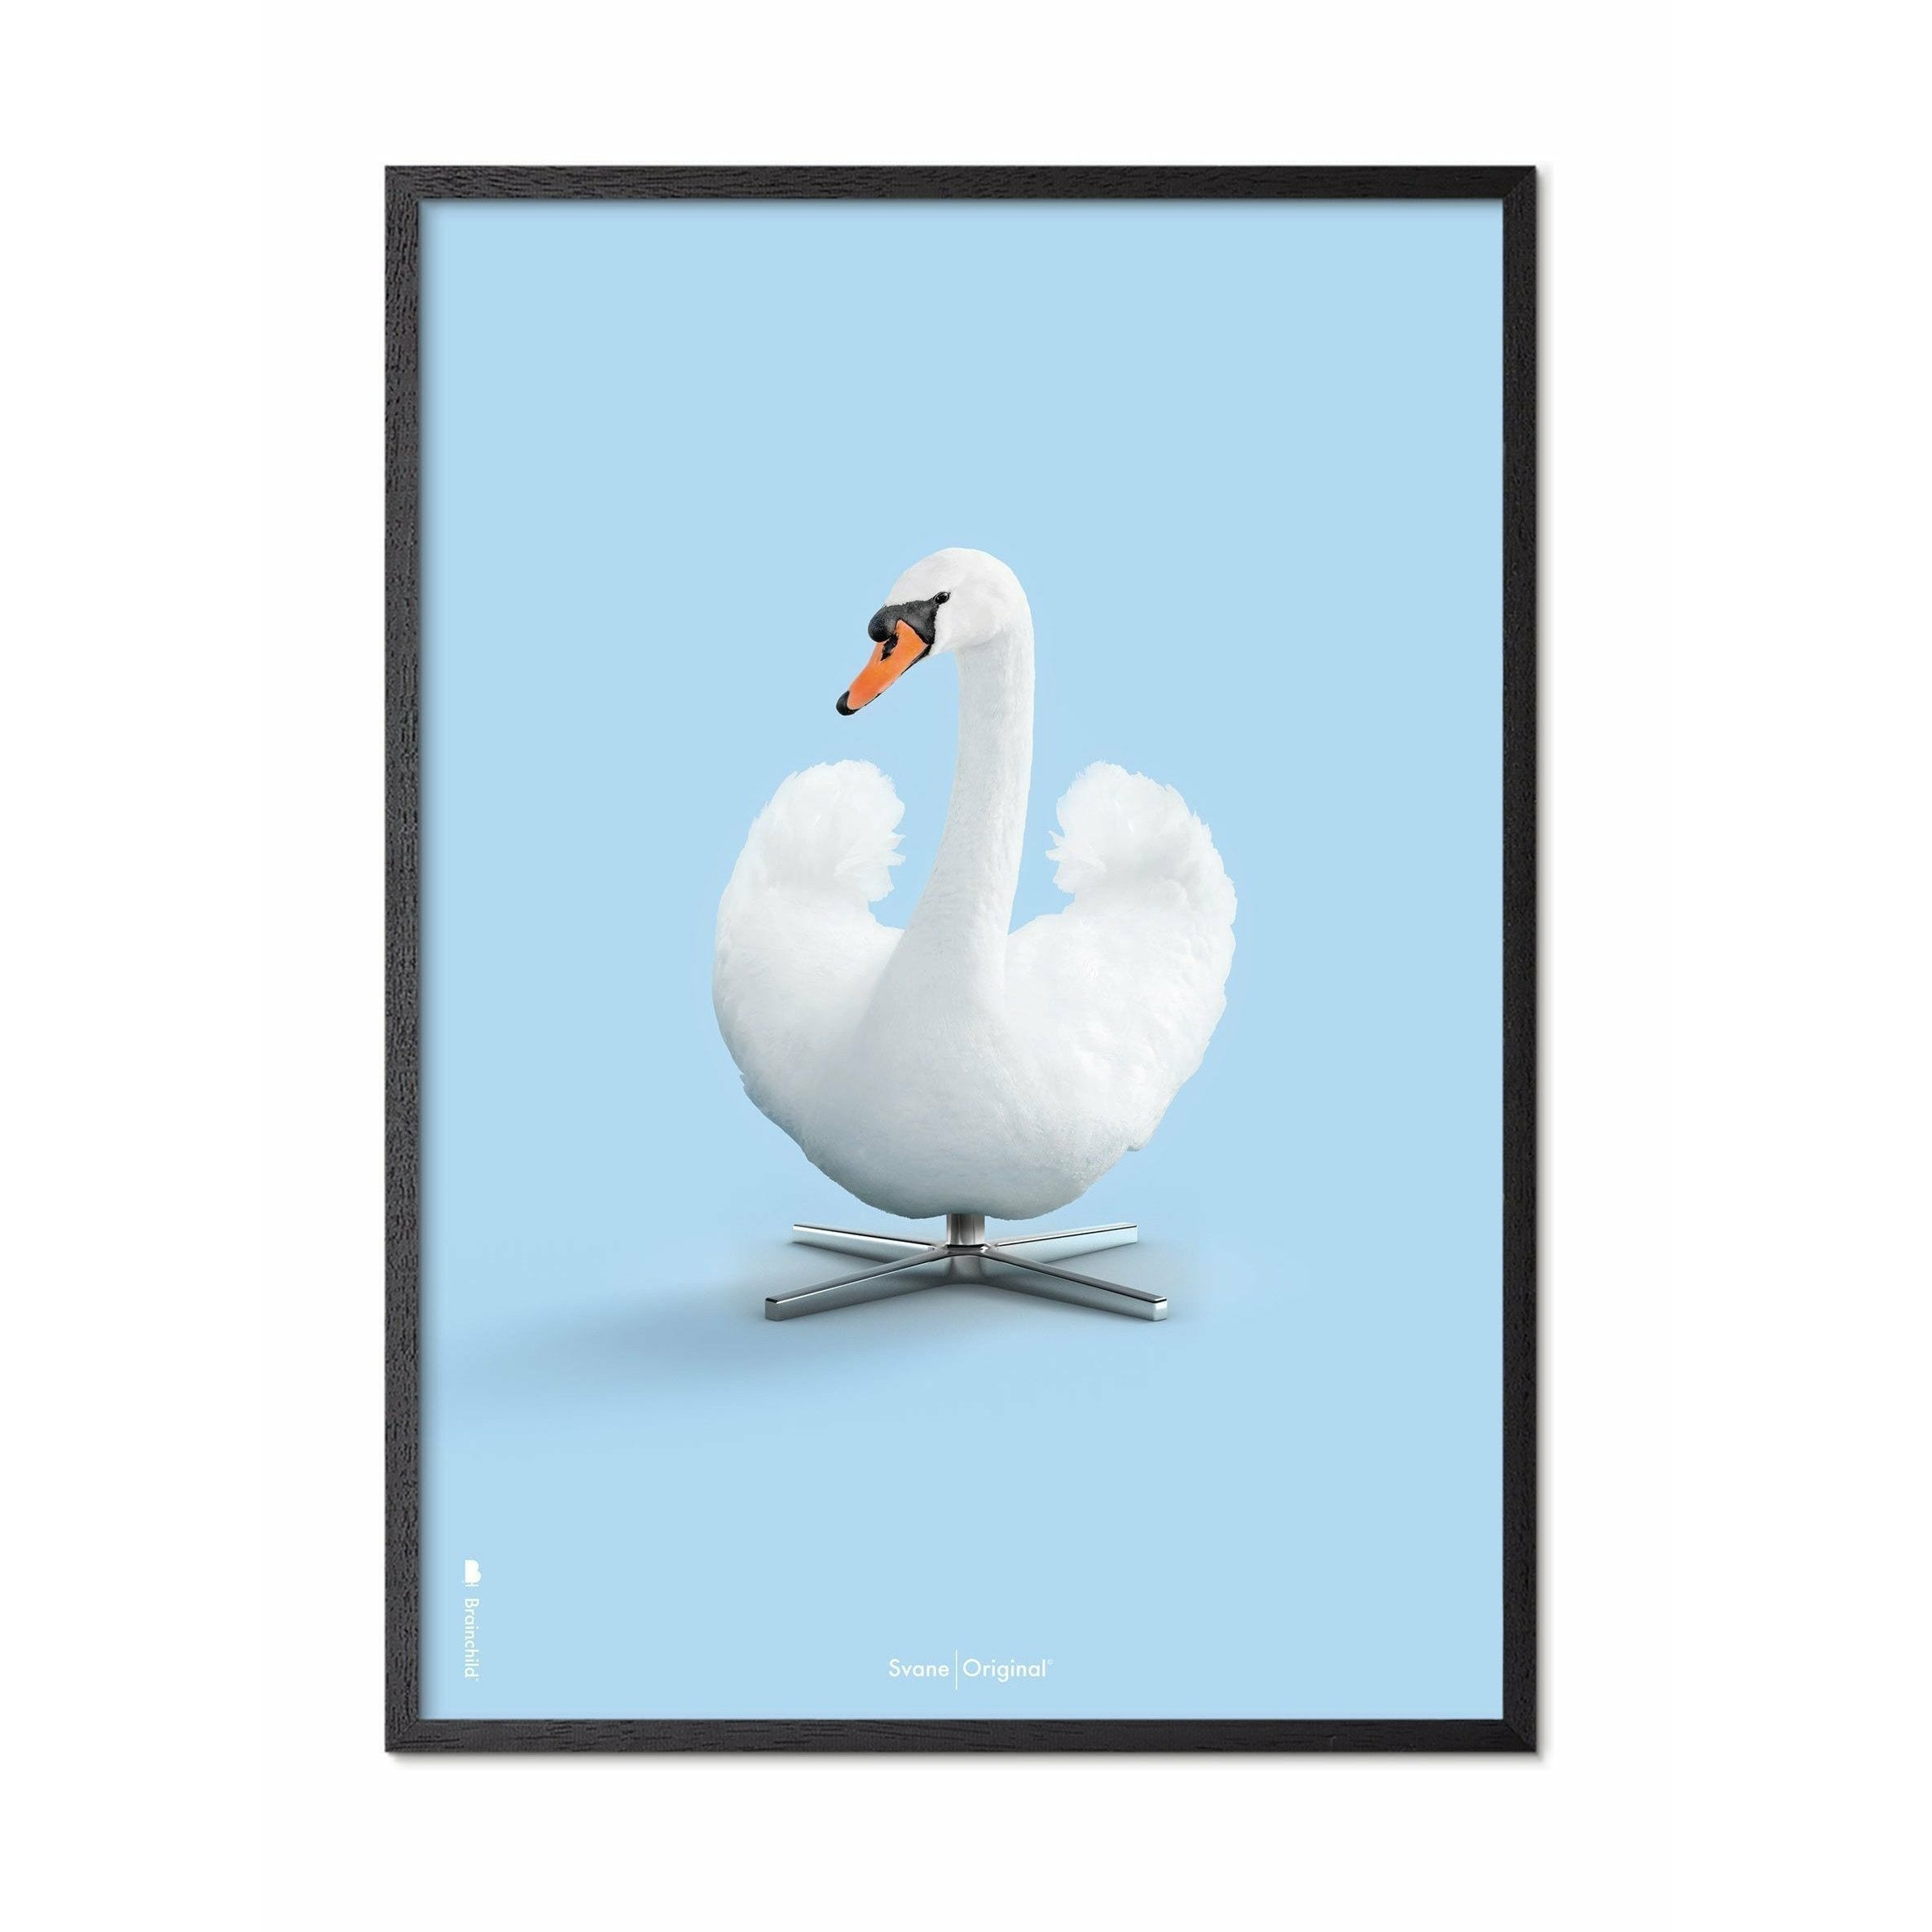 Brainchild Swan Classic Poster, Frame In Black Lacquered Wood 30x40 Cm, Light Blue Background